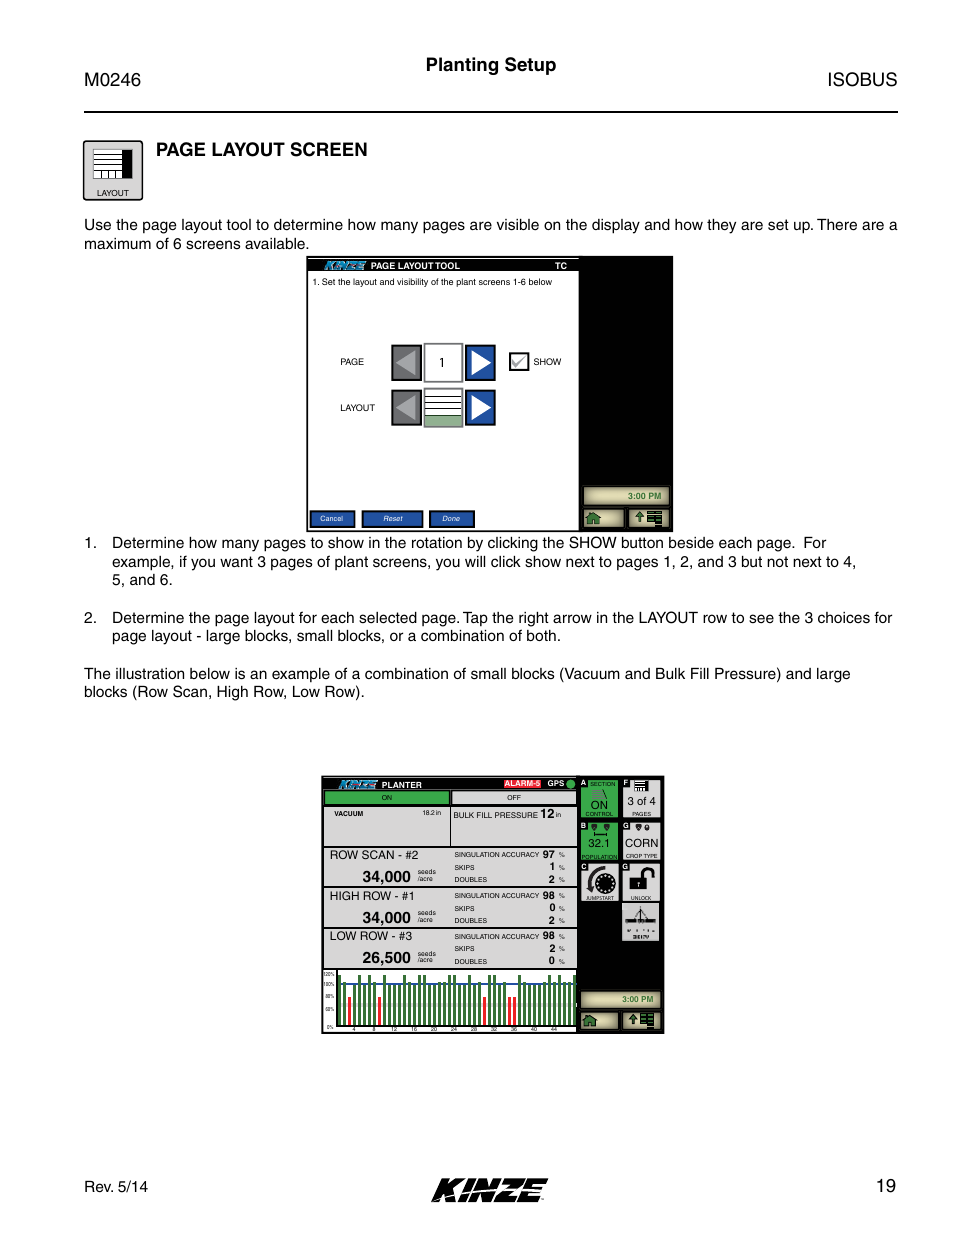 Isobus m0246, 19 page layout screen, Planting setup | Rev. 5/14 | Kinze ISOBUS Electronics Package (3000 Series) Rev. 5/14 User Manual | Page 25 / 46